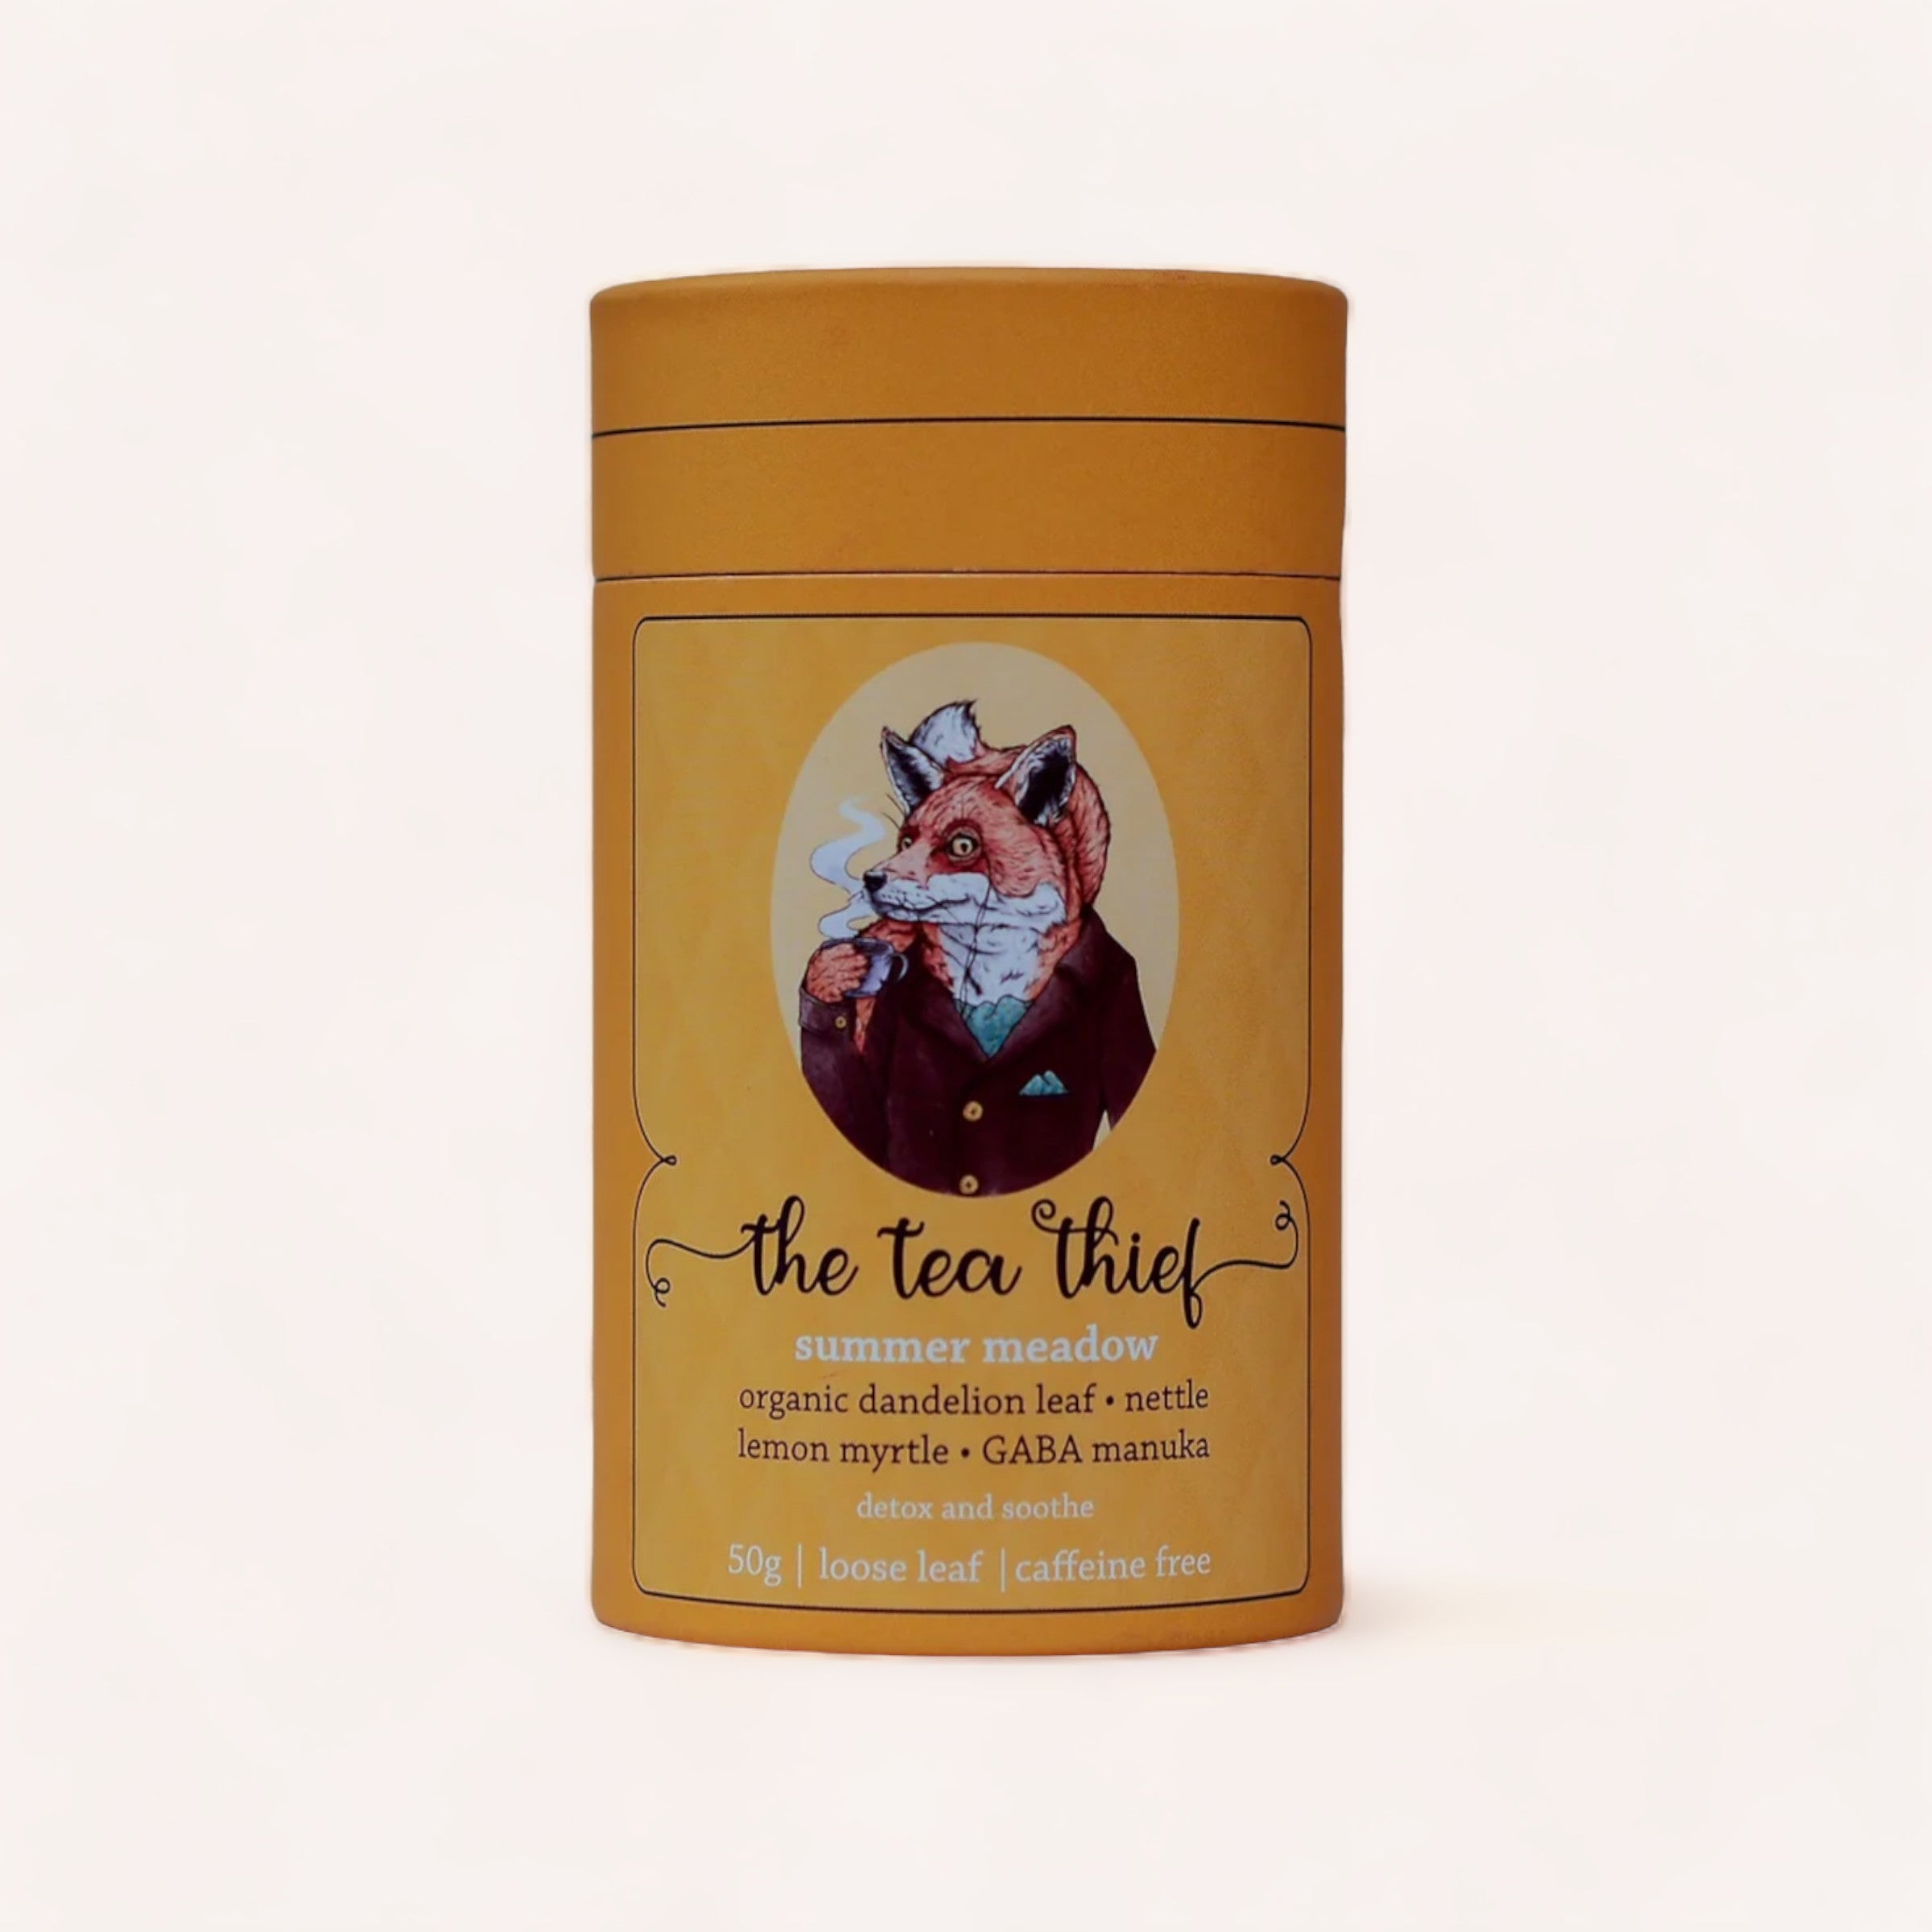 A whimsical tea container labeled "Summer Meadow 50g by The Tea Thief" featuring an illustrated fox wearing a collared shirt and blazer. The tea is described as "energy-boosting summer meadow" with ingredients.